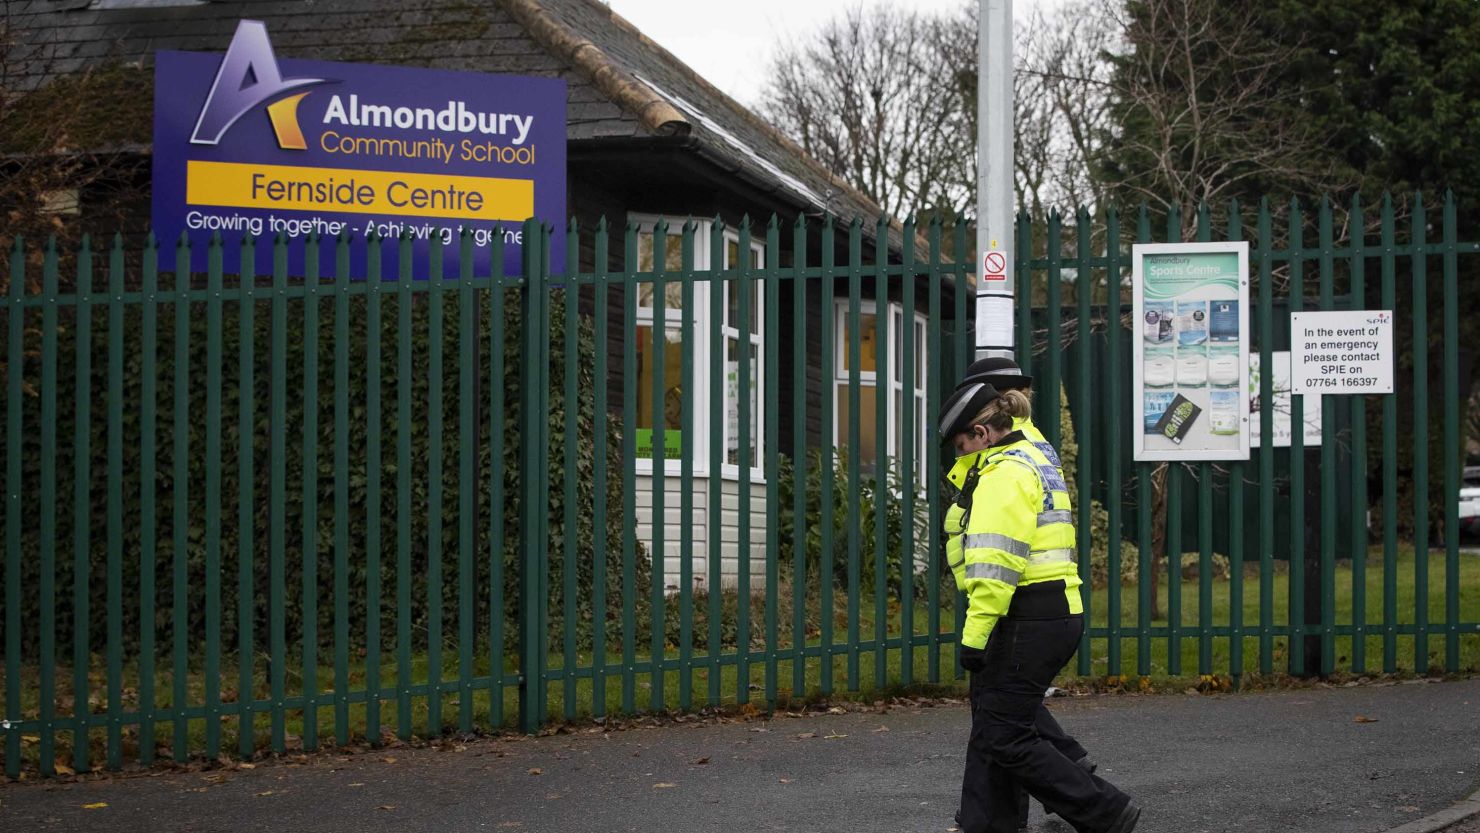 Officers on Wednesday passing the Almondbury Community School in Huddersfield, England, where police are investigating the assault of a Syrian boy.